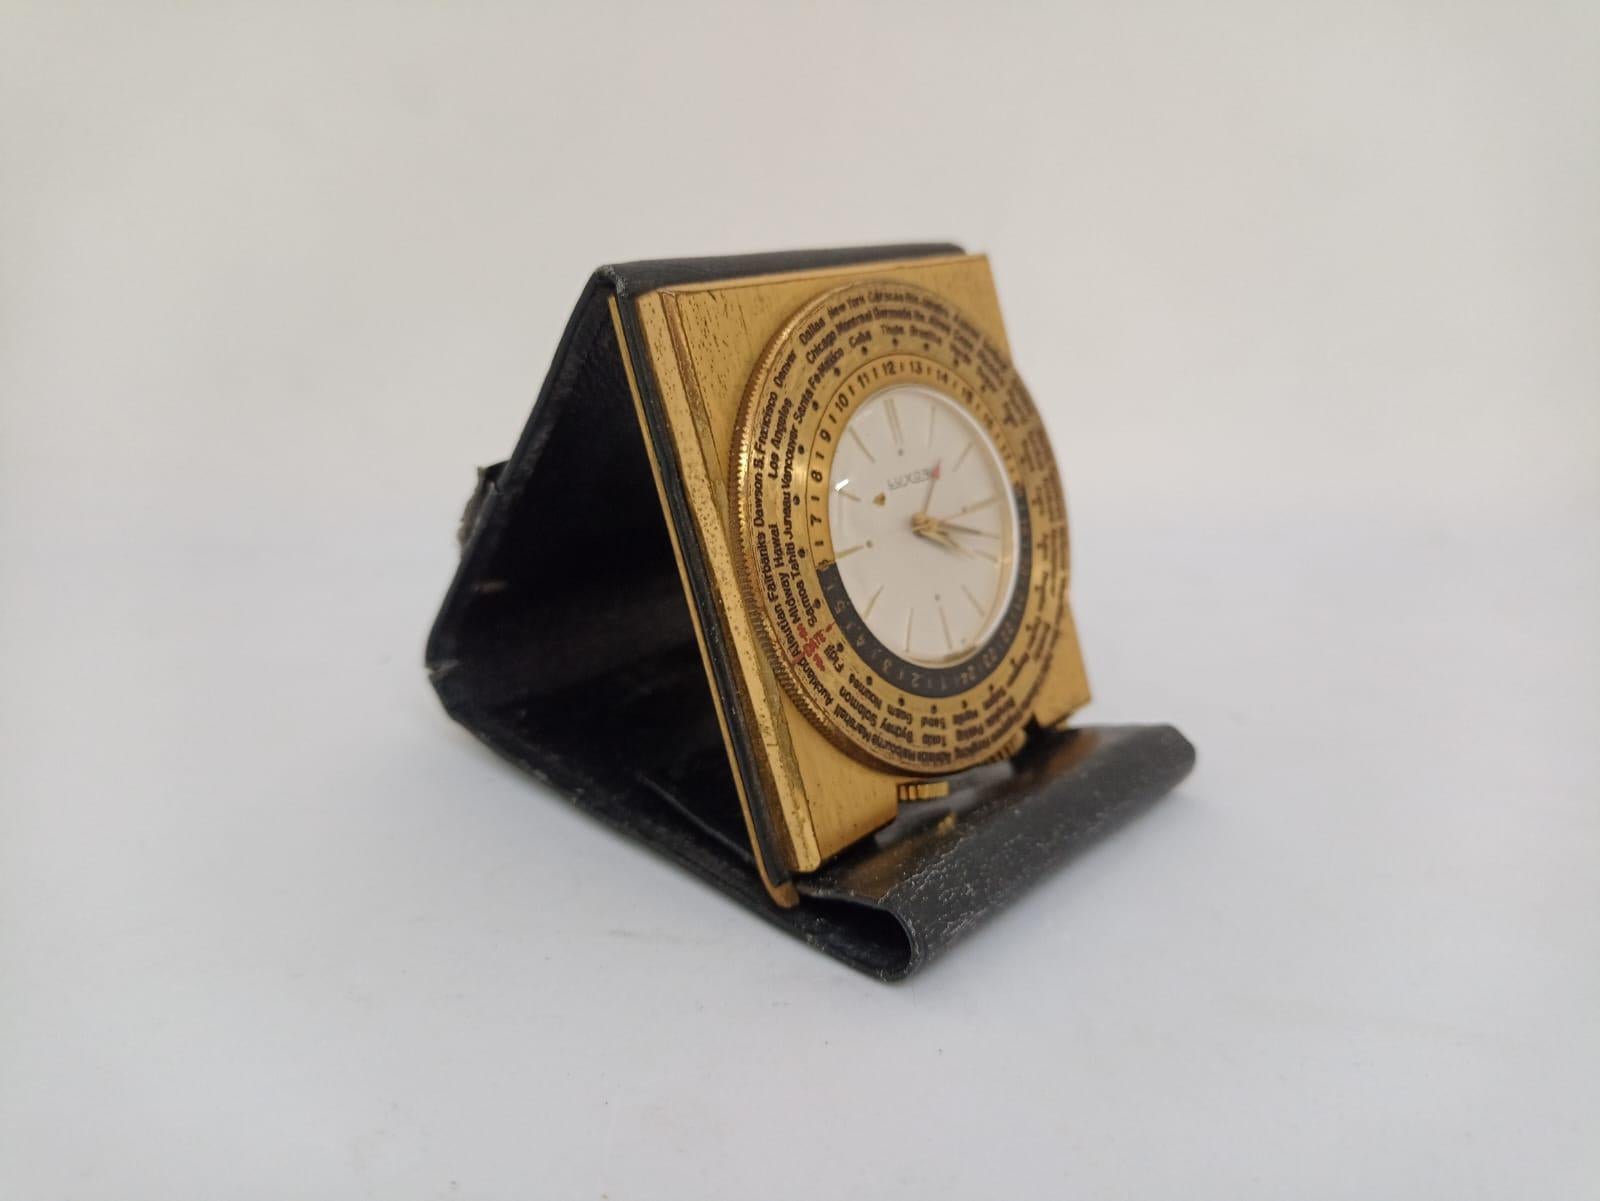 Travel clock Luxor World time
Origin Switzerland Circa 1960
Manual winding and alarm
working and in very good condition
natural wear The leather cover has a small tear.
Golden patina with natural wear
Travel clock made by the LUXOR brand to